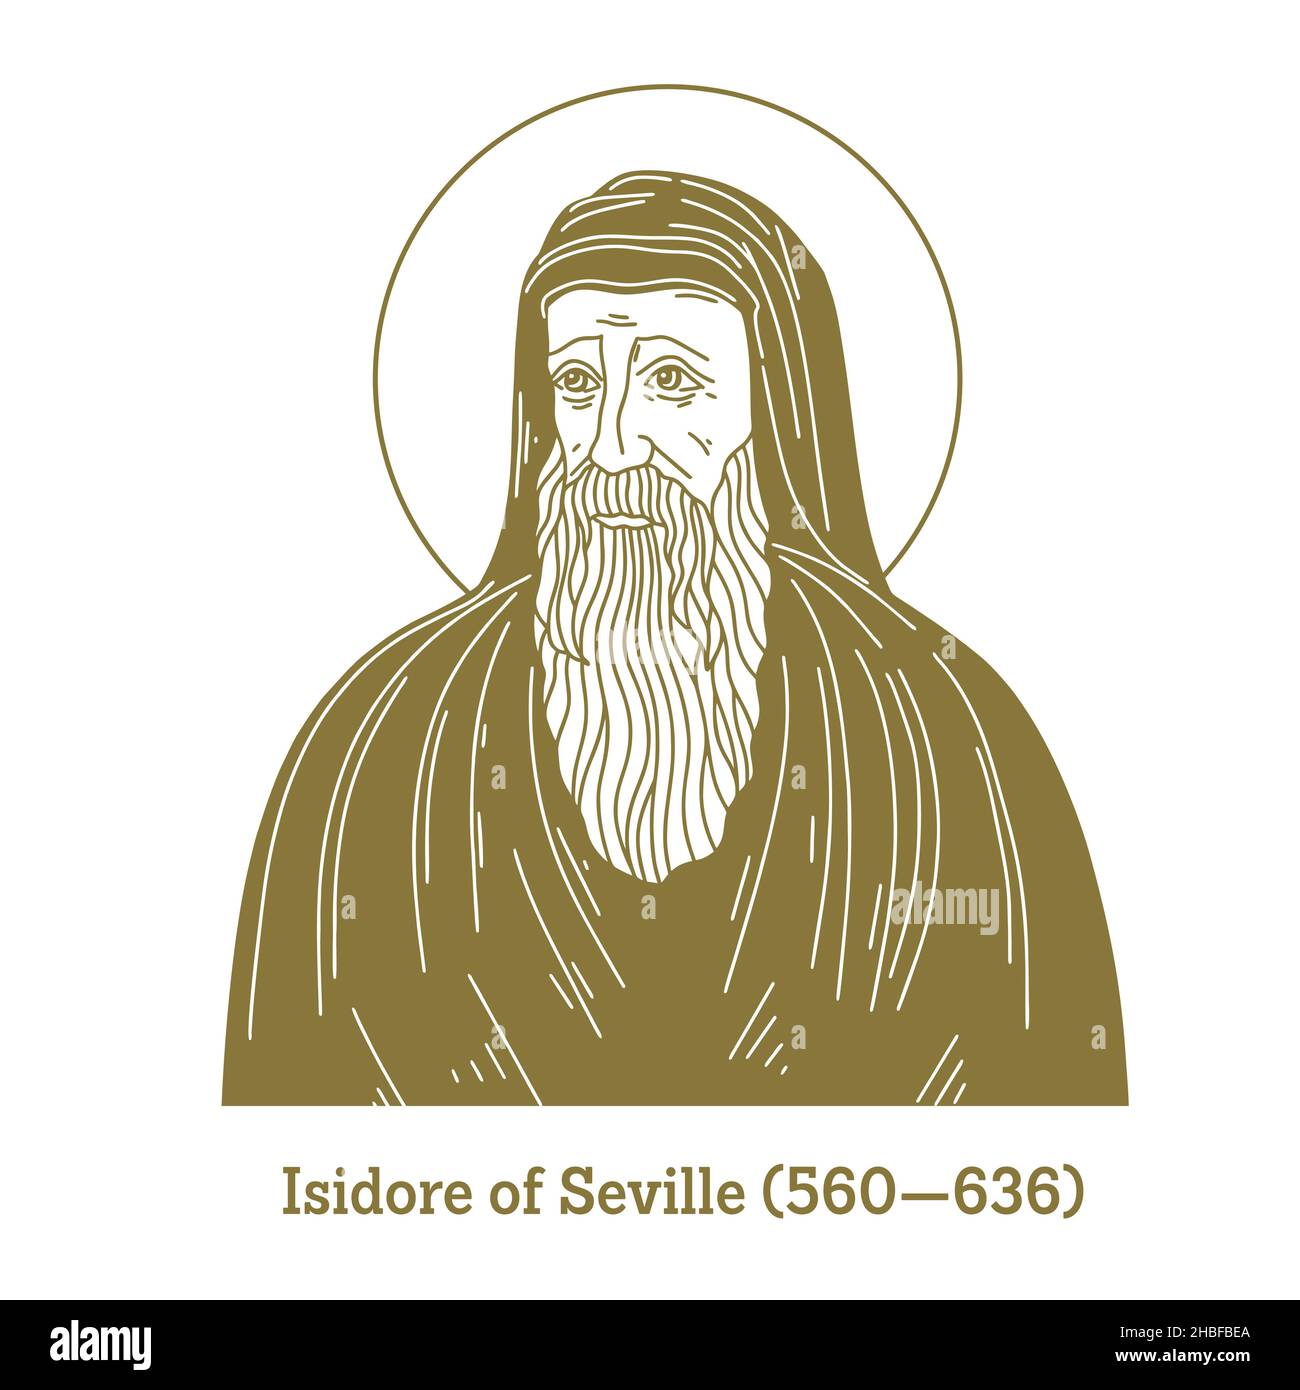 Isidore of Seville (560-636) was a Spanish scholar and cleric. For over three decades, he was Archbishop of Seville. Stock Vector